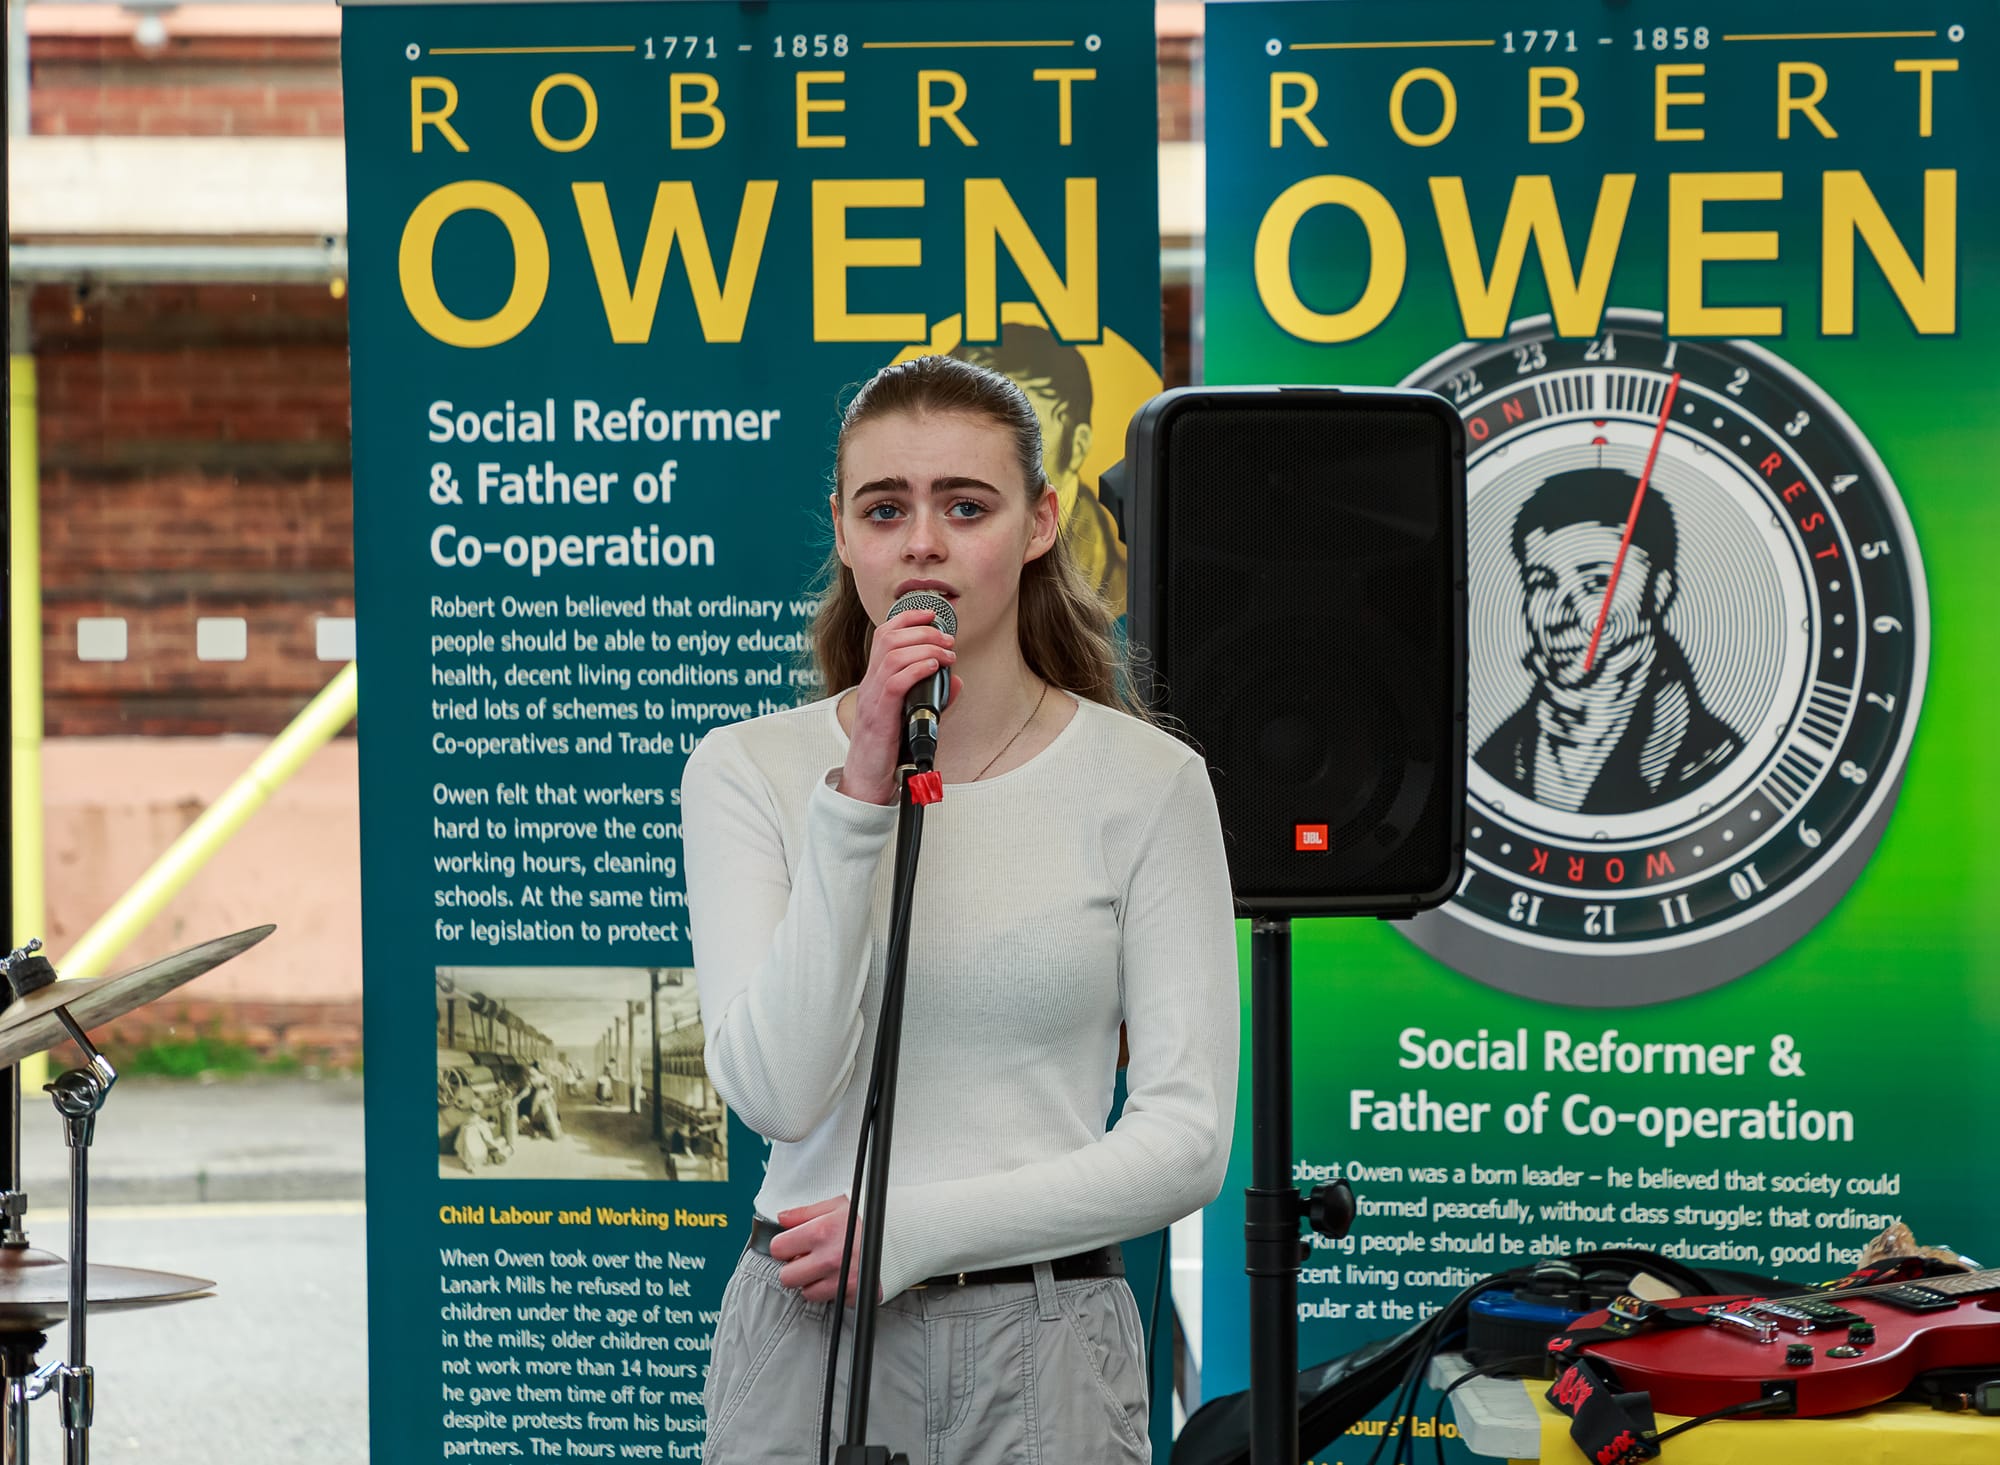 Robert Owen, Father of Co-operation making his mark in Belper!